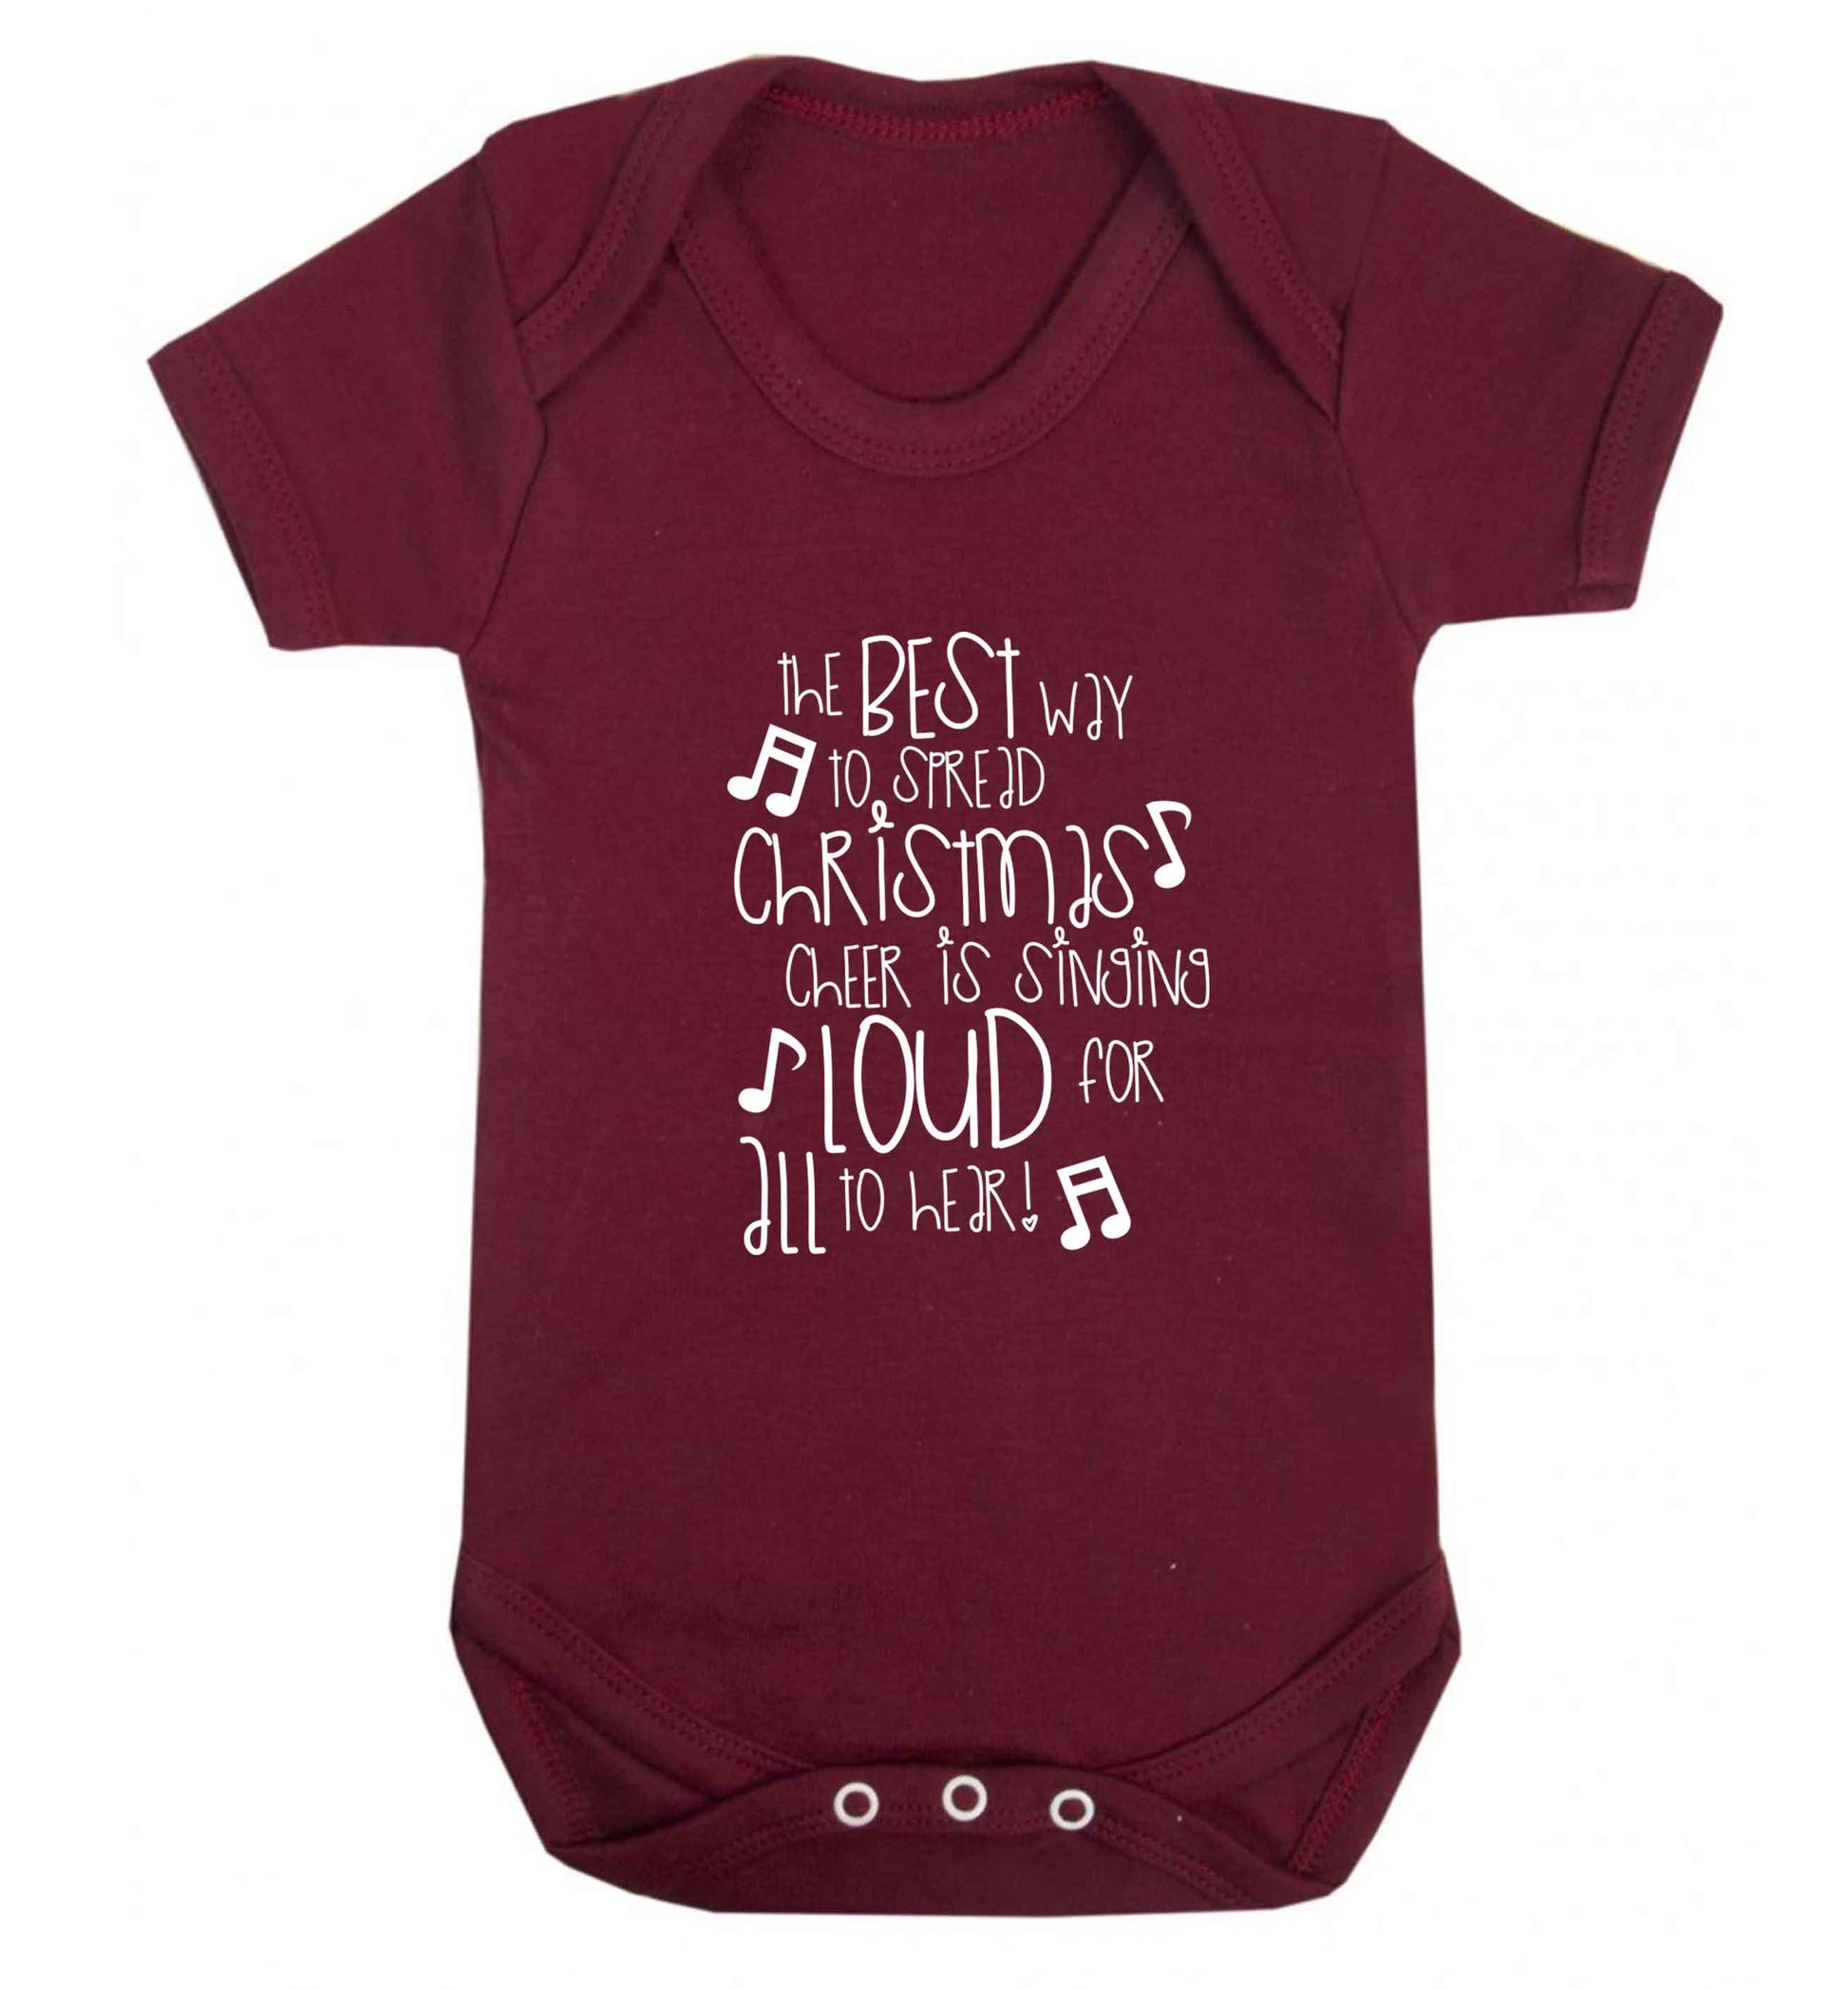 The best way to spread Christmas cheer is singing loud for all to hear baby vest maroon 18-24 months